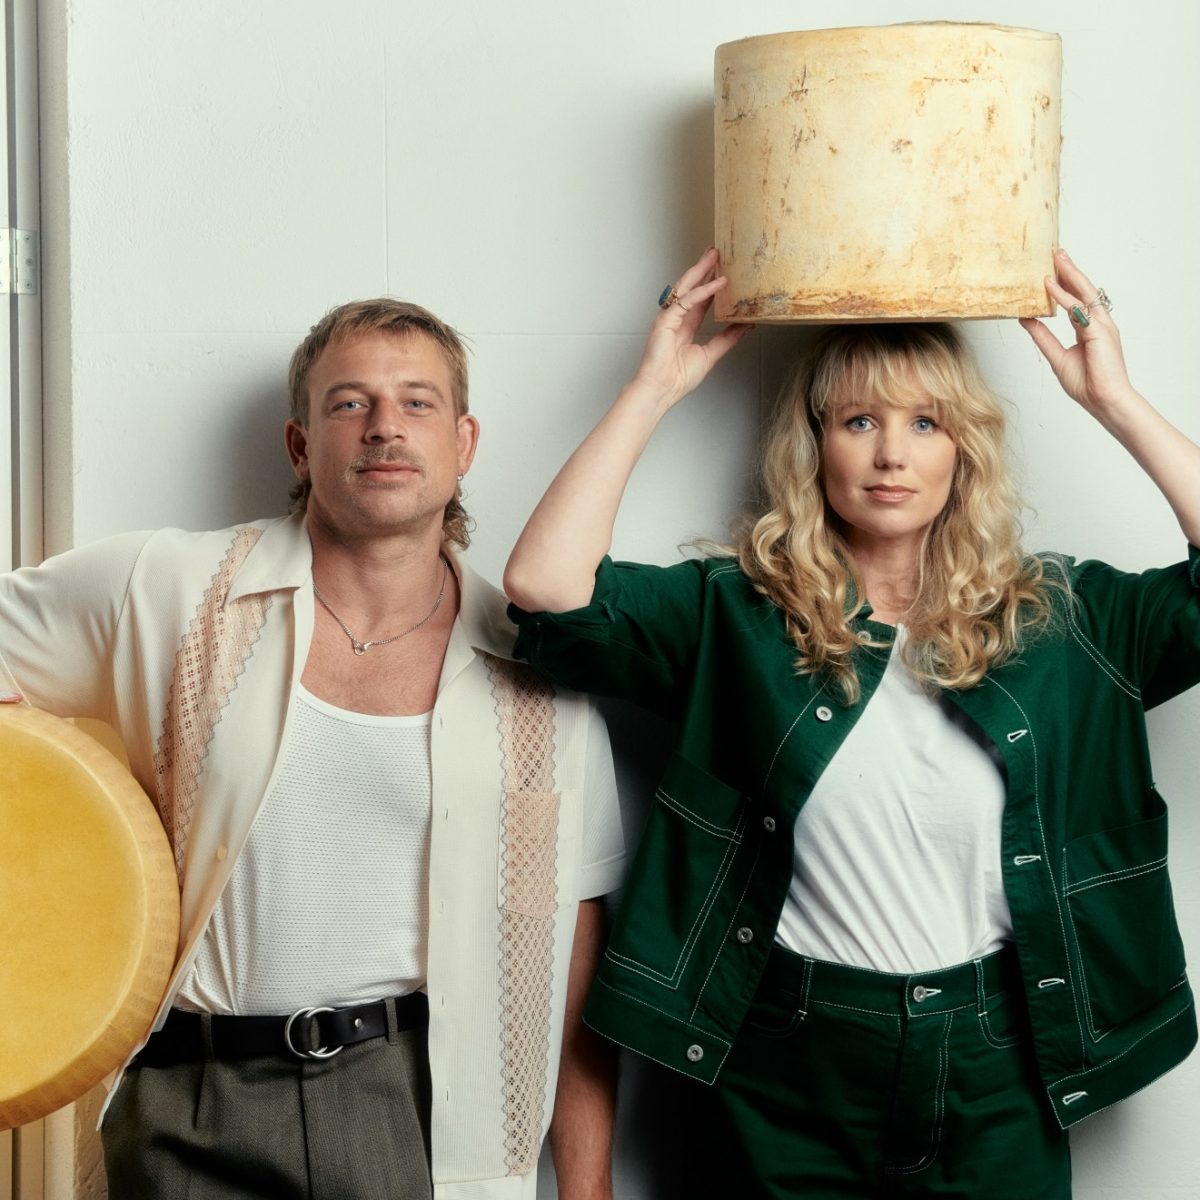 Sam Studd (left) of the Studd Siblings is an internationally certified cheese expert.